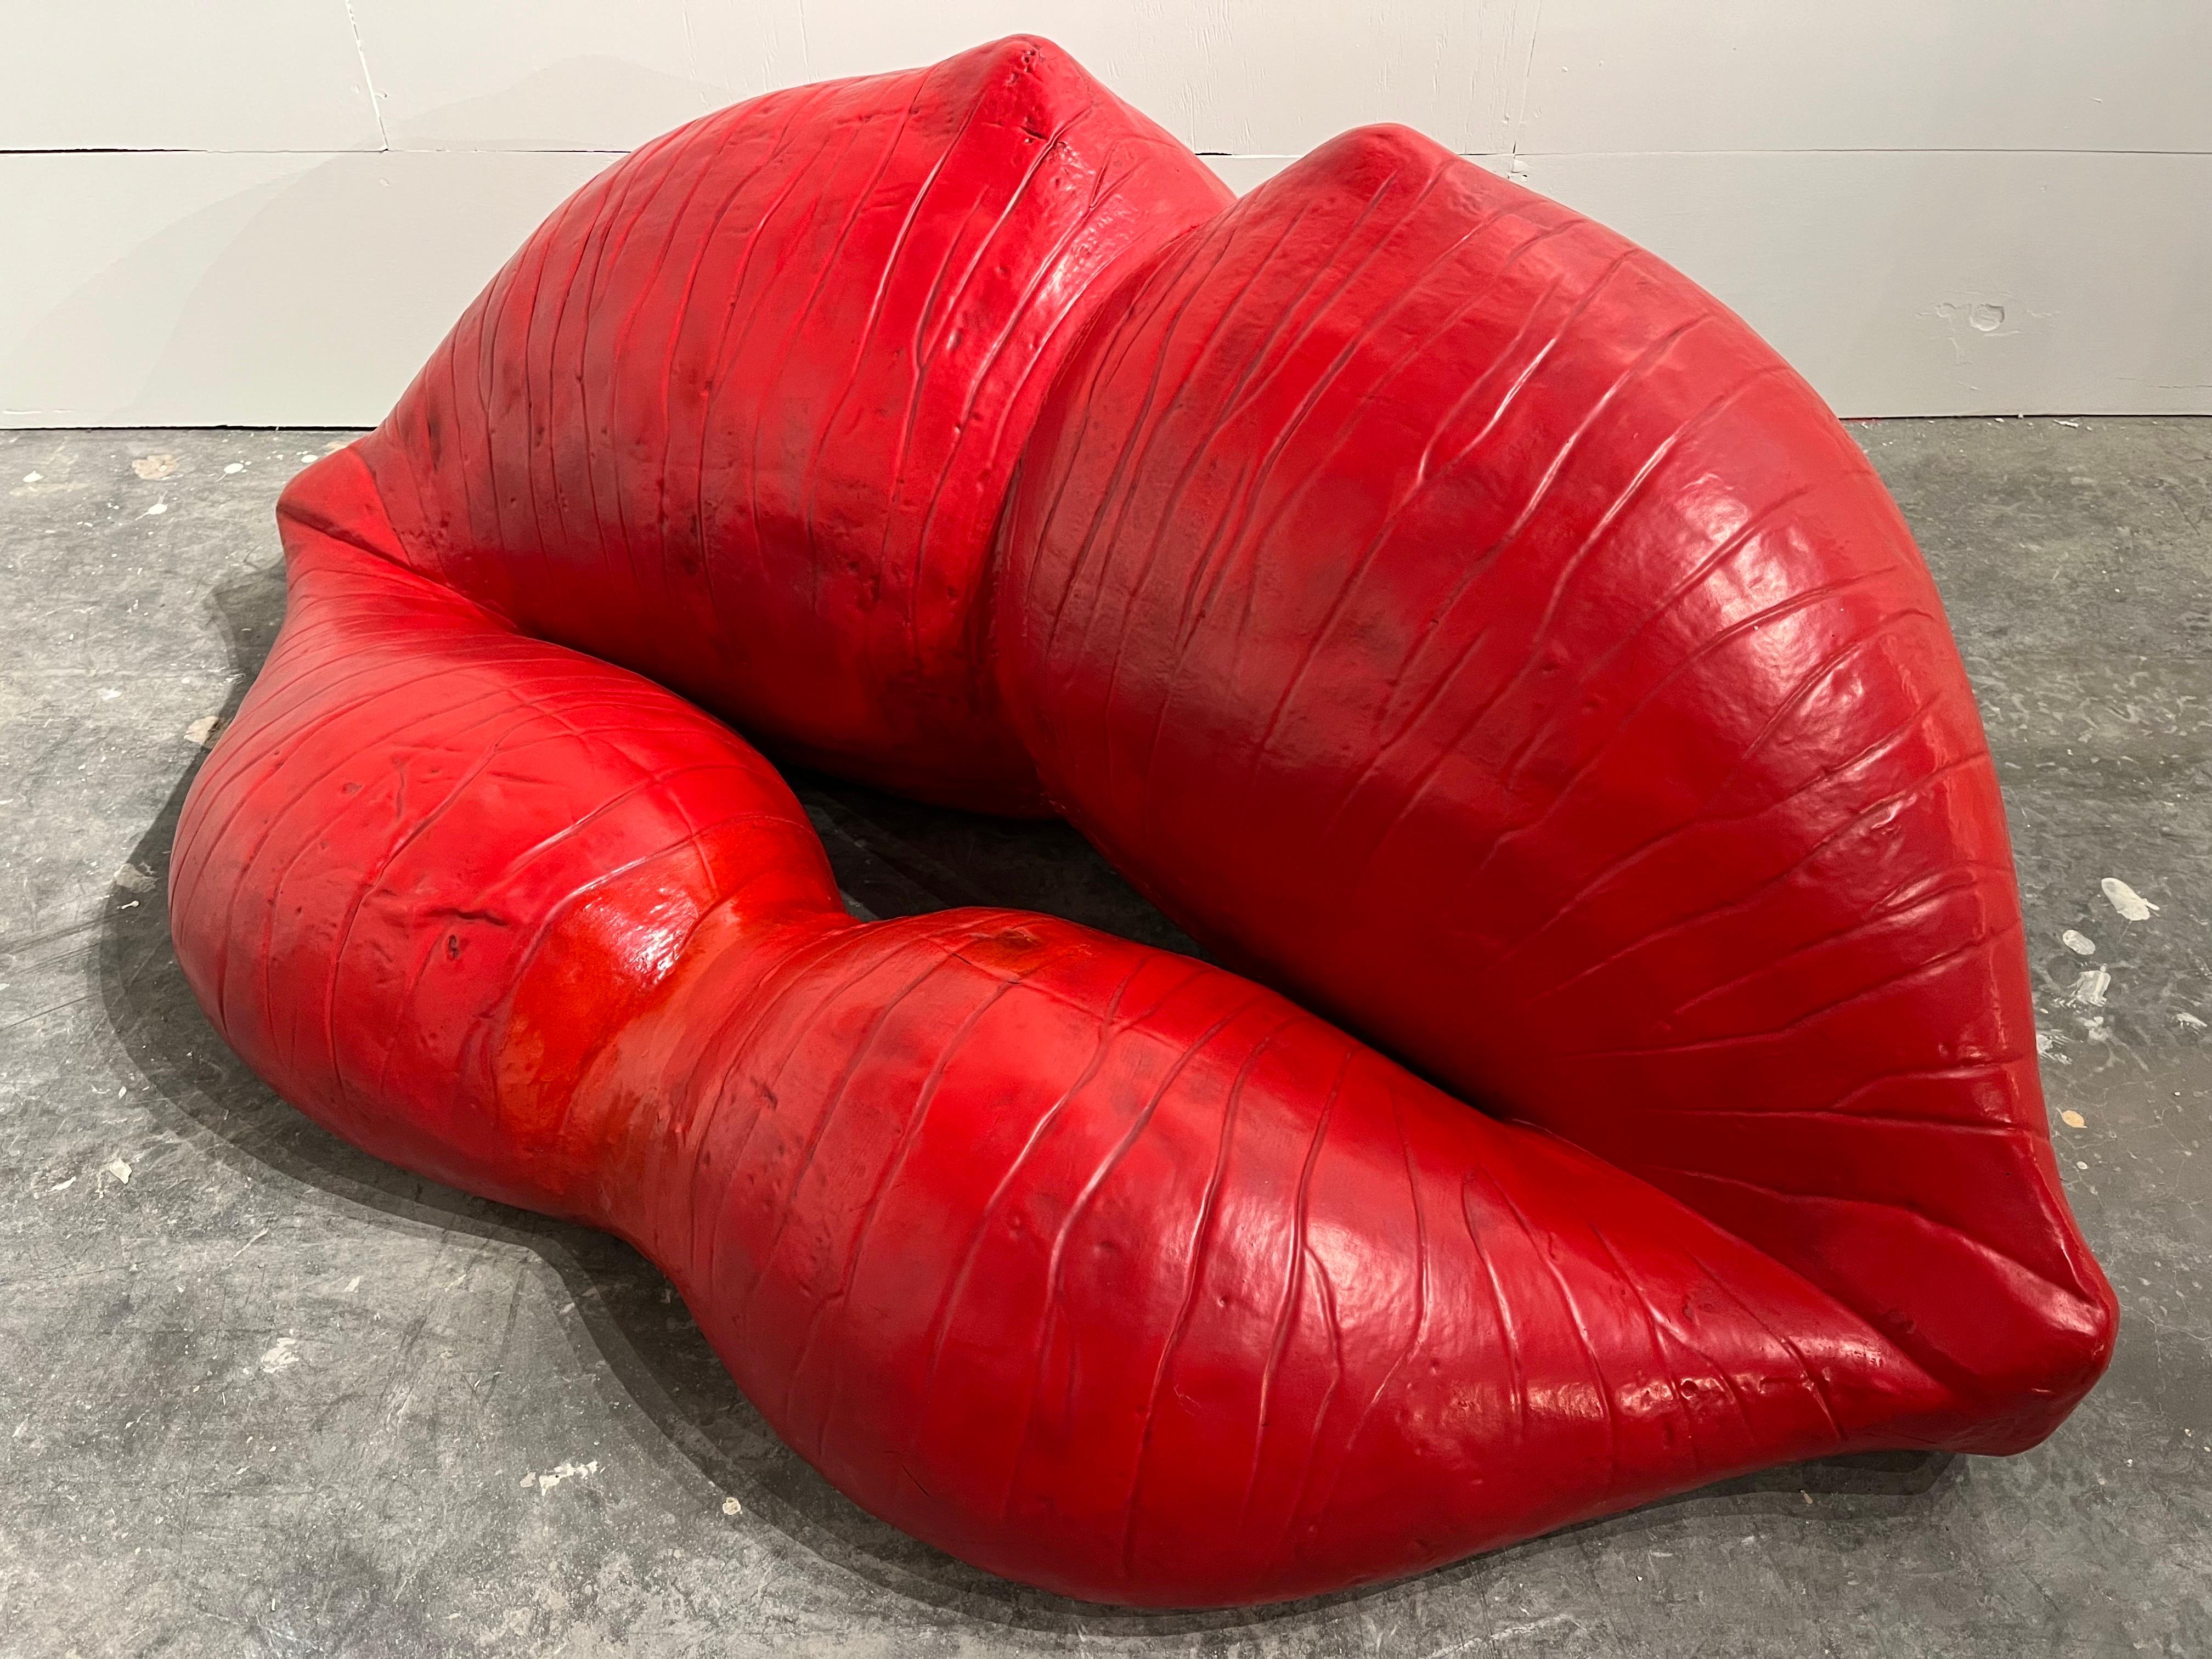 Louis Durot French Post War Artist Red Lips L'echauffeuse Sofa Settee Sculpture For Sale 12